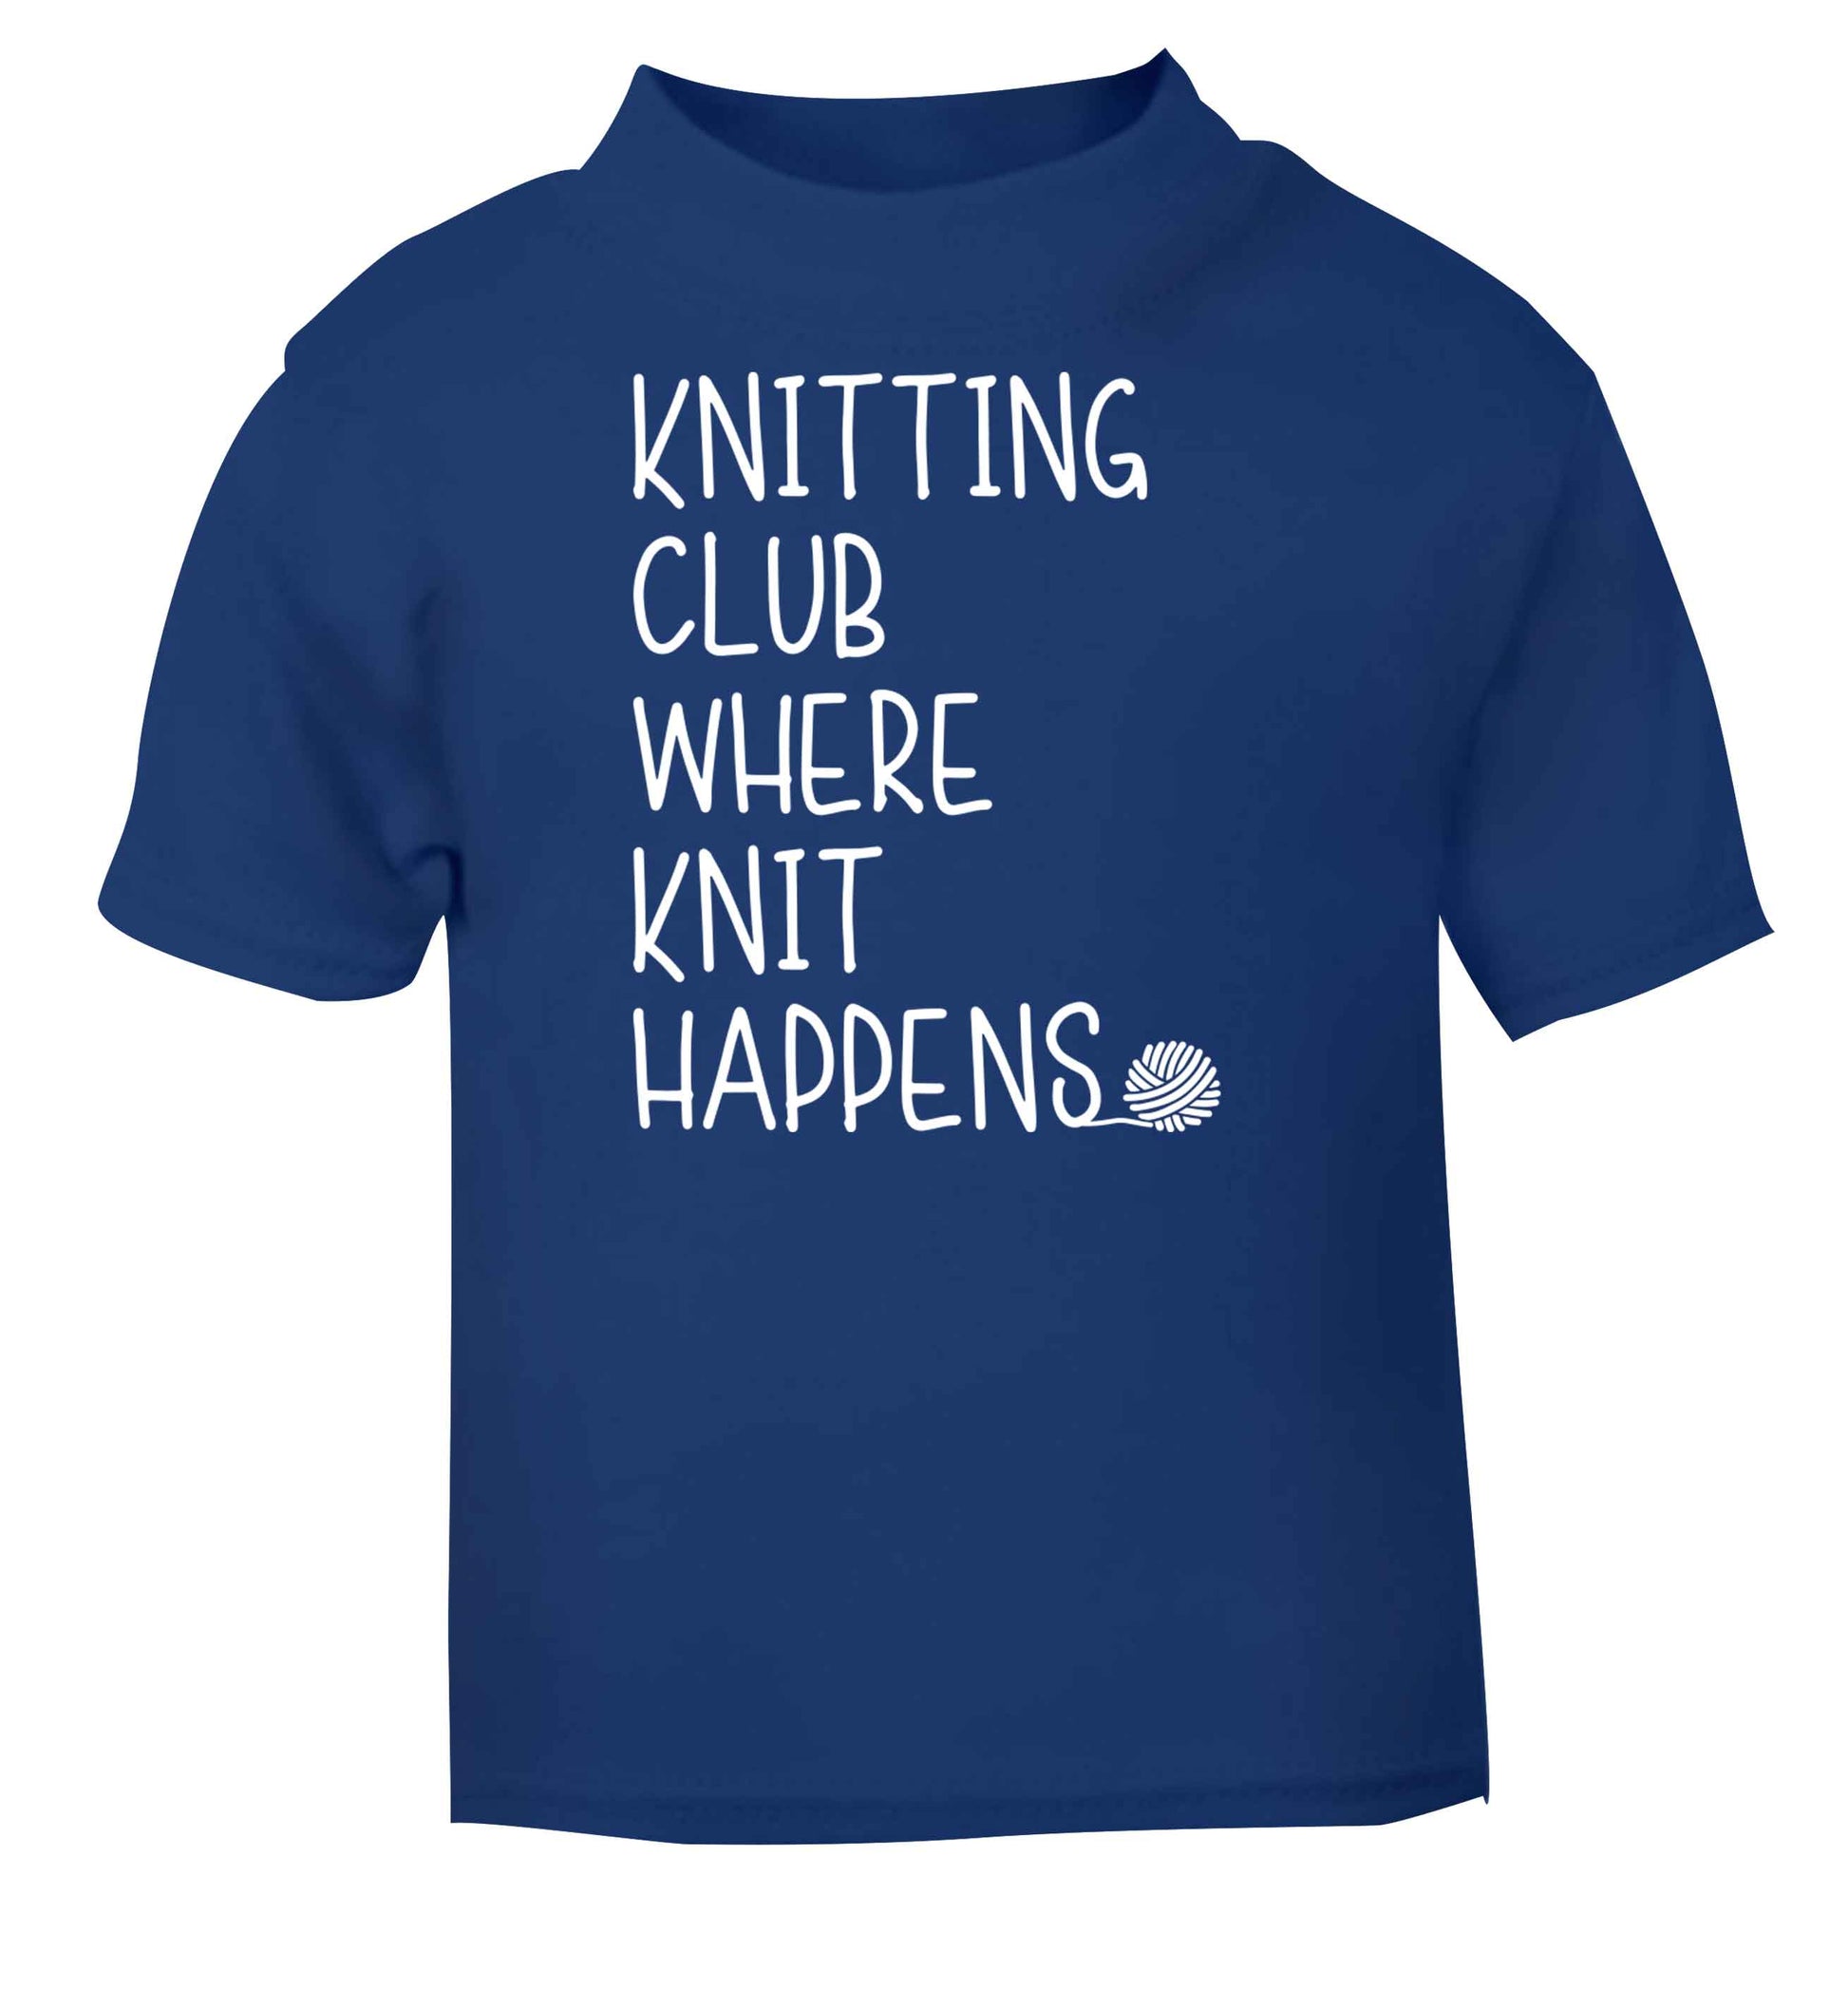 Knitting club where knit happens blue baby toddler Tshirt 2 Years